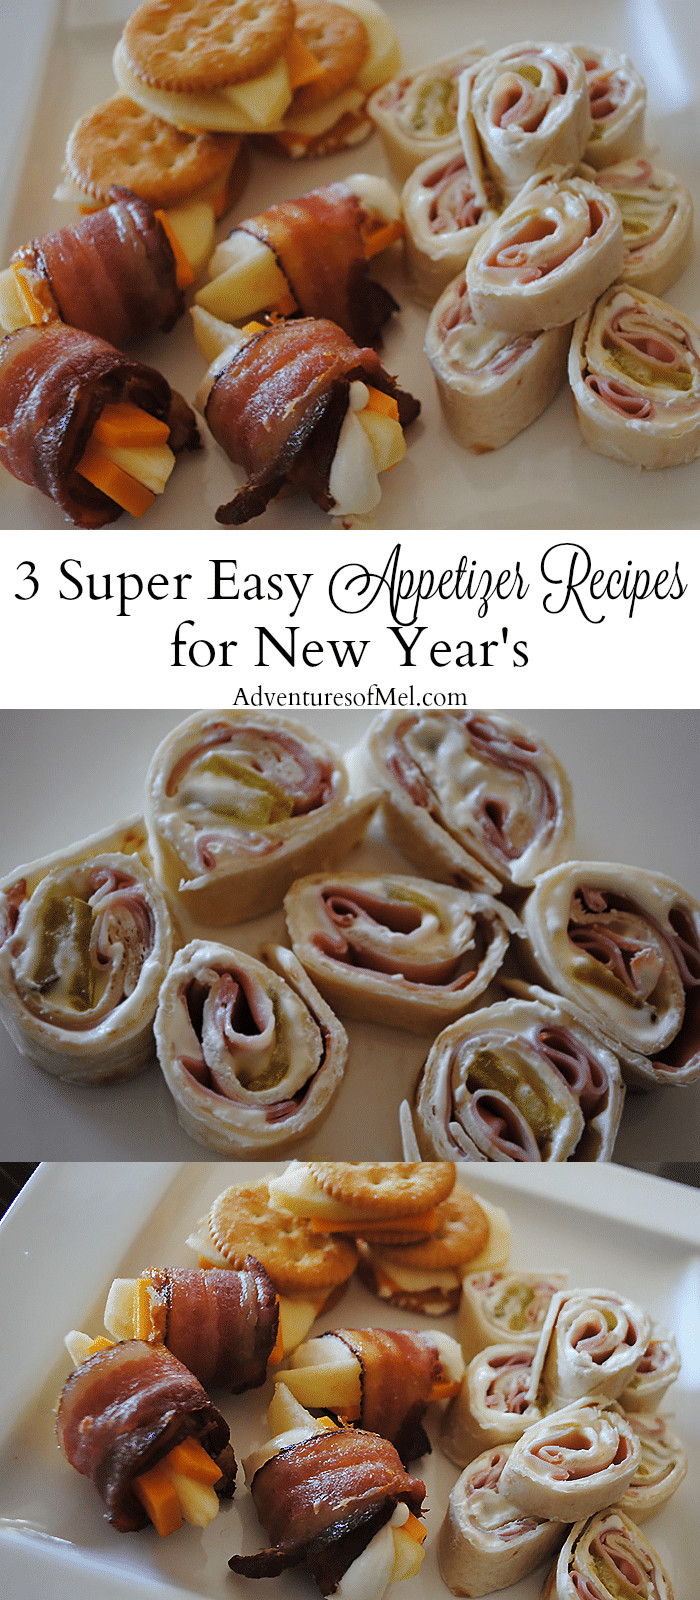 Easy New Years Appetizers
 3 Super Easy Appetizer Recipes for New Year s Adventures